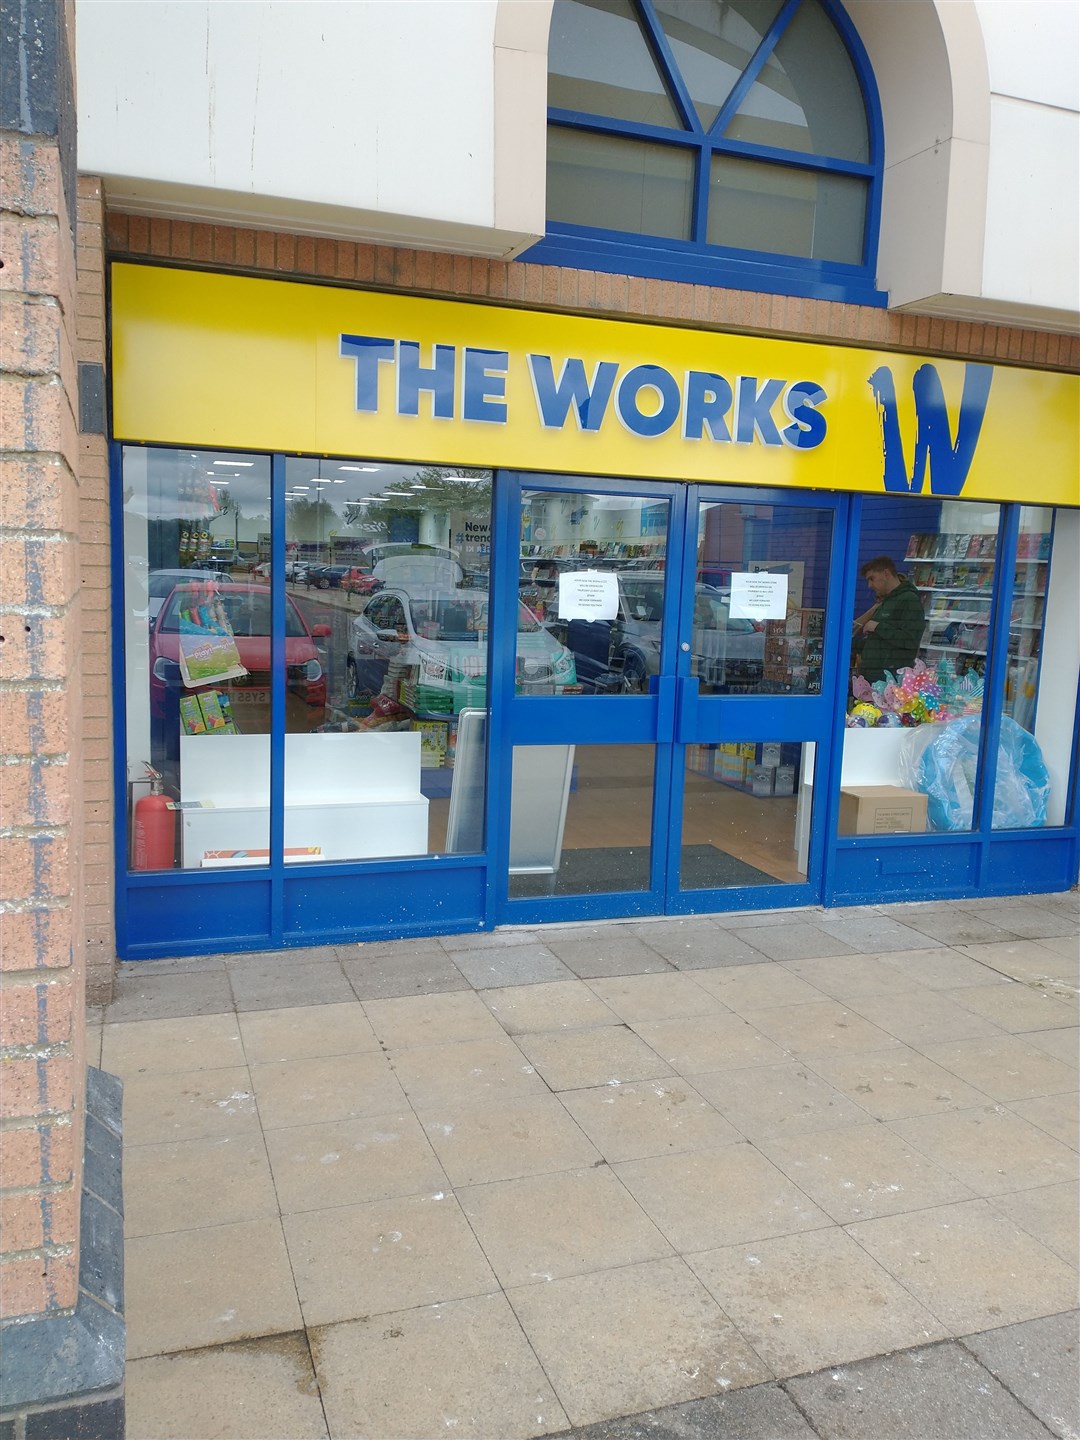 The new shop will be opening next to Costa Coffee at Invernes Shopping Park this week.